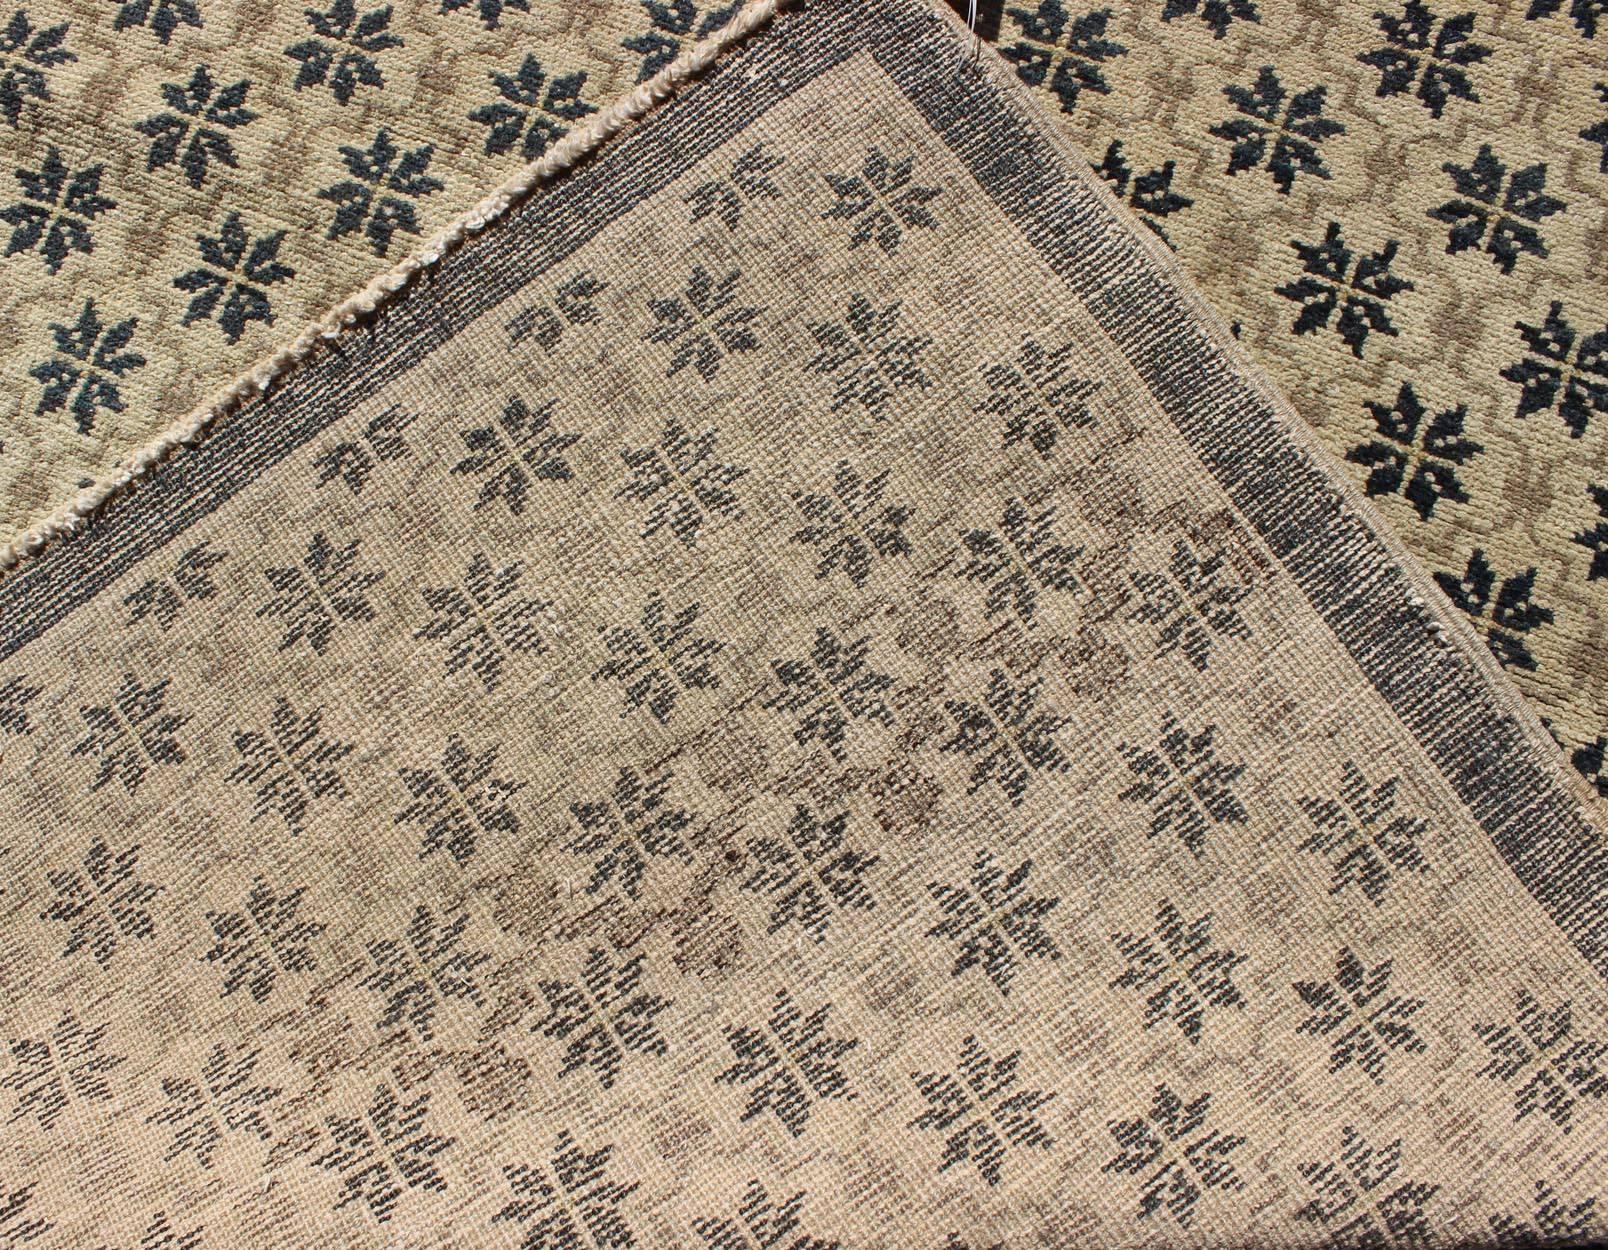 Onyx and Cream Vintage Turkish Oushak Rug with Latticework and Poinsettia Shapes For Sale 1